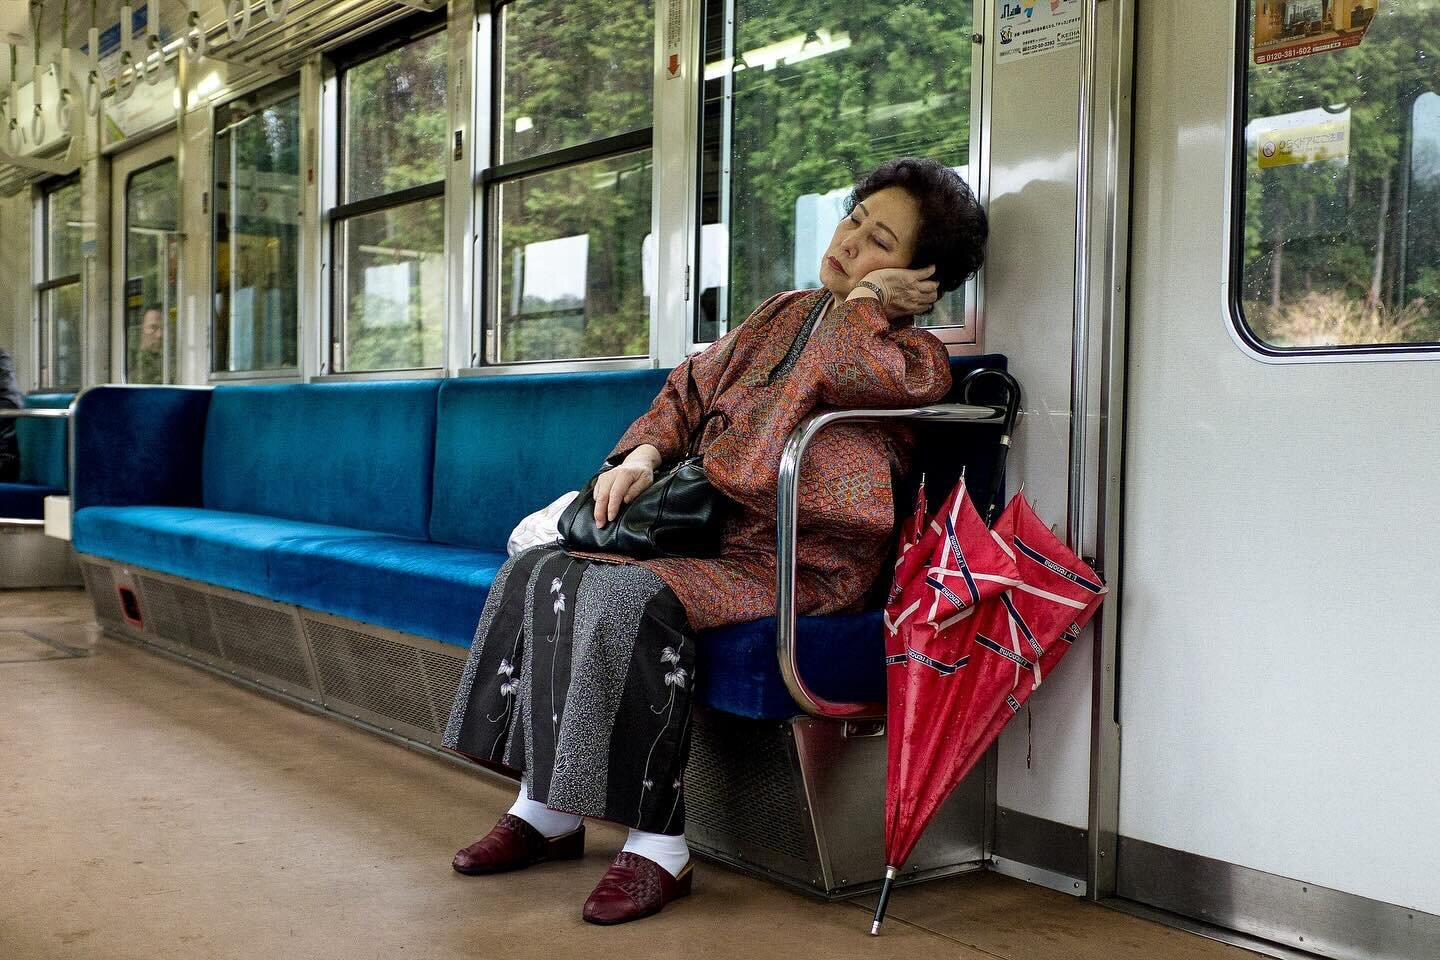 Trains in Japan are a source of pride for the entire community. They are renowned for their punctuality and speed, ranking among the fastest on Earth. Yet, in the remote countryside, they can embrace a slower pace. From bustling with people to standi